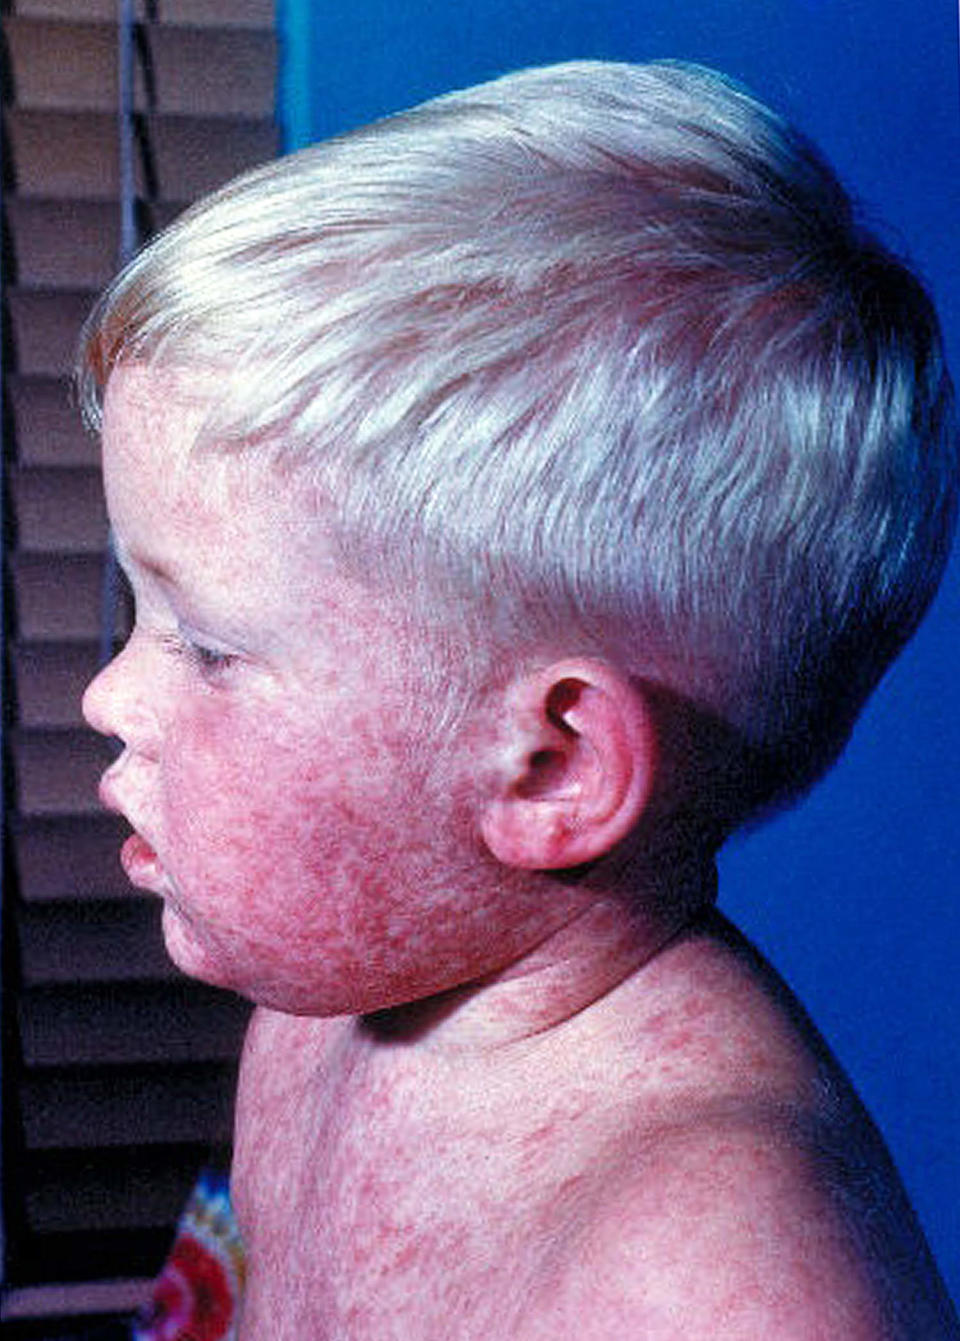 Measles rashes sometimes appear blotchy. (Courtesy Centers for Disease Control and Prevention)